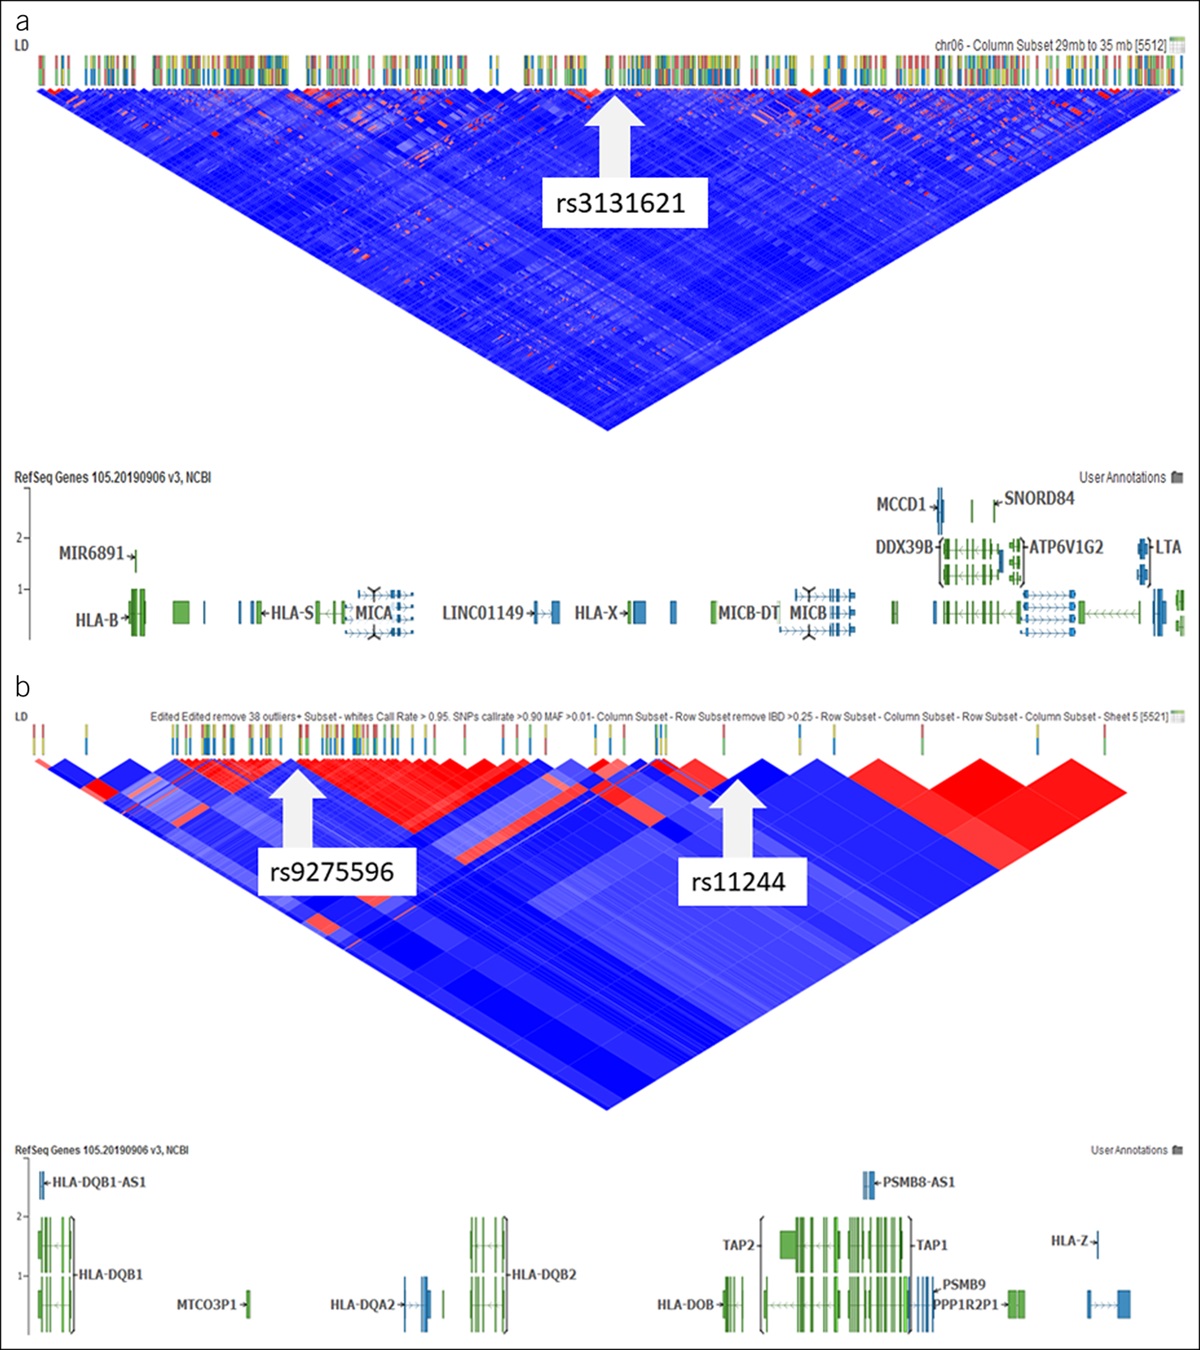 Novel Genetic Risk Variants and Clinical Predictors Associated With Primary Sclerosing Cholangitis in Patients With Ulcerative Colitis